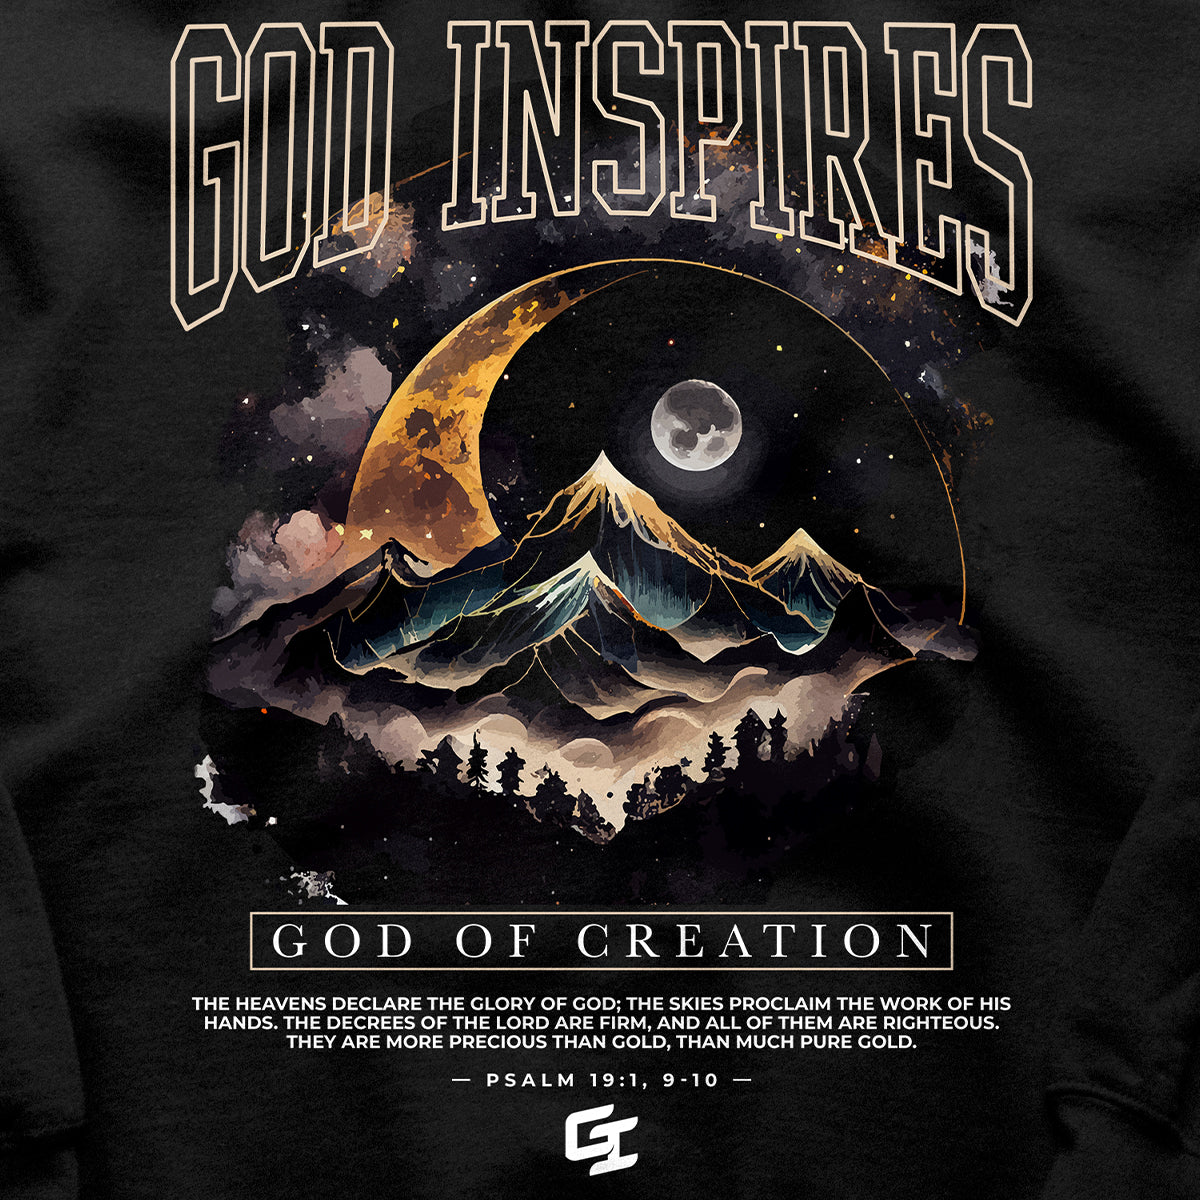 Theophany 'God of Creation' Hoodie